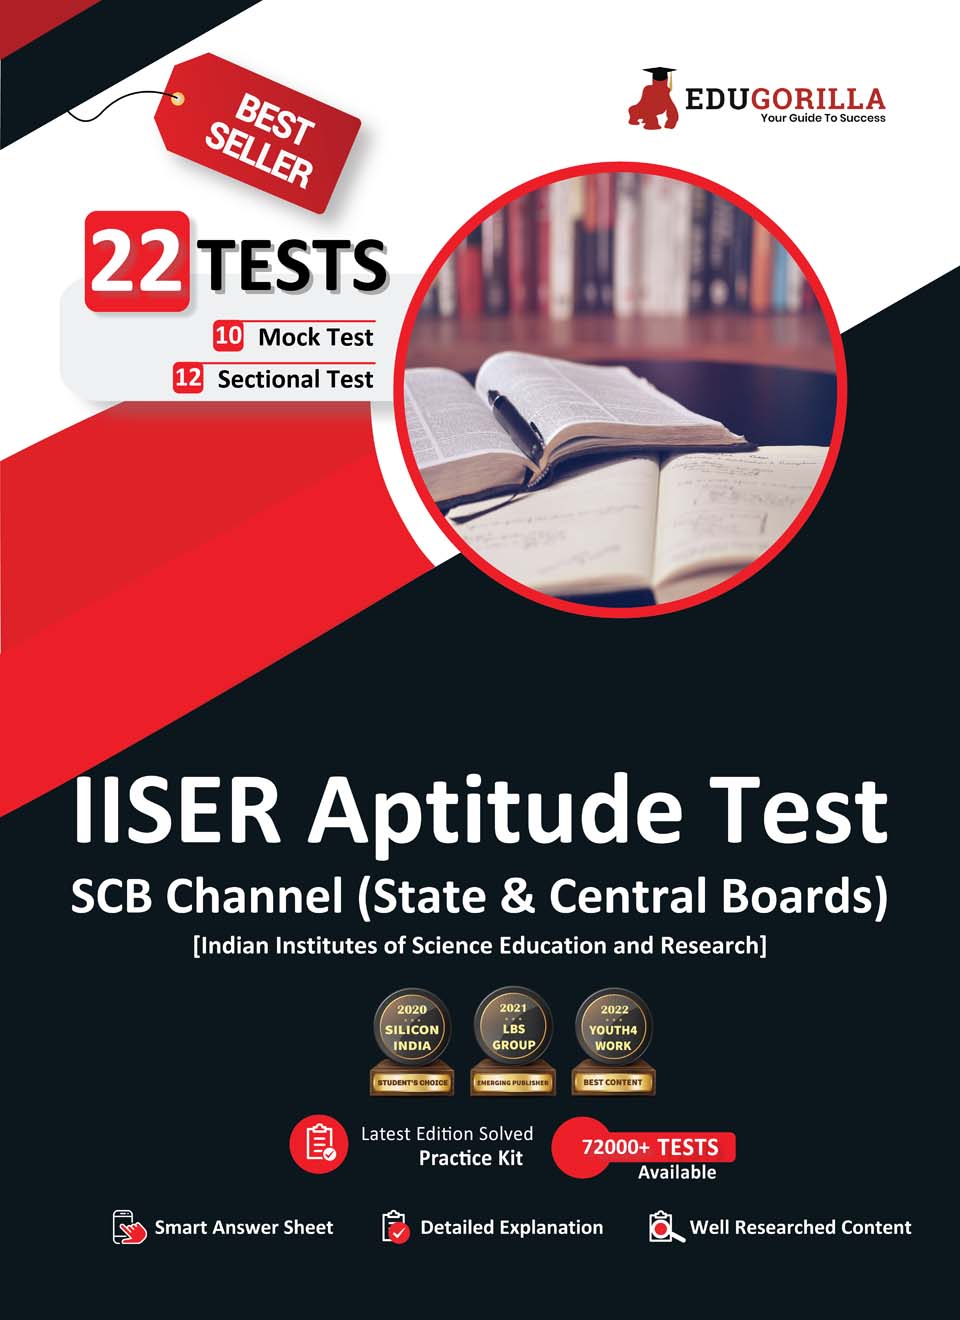 buy-iiser-aptitude-test-scb-channel-state-central-boards-preparation-book-2023-at-10